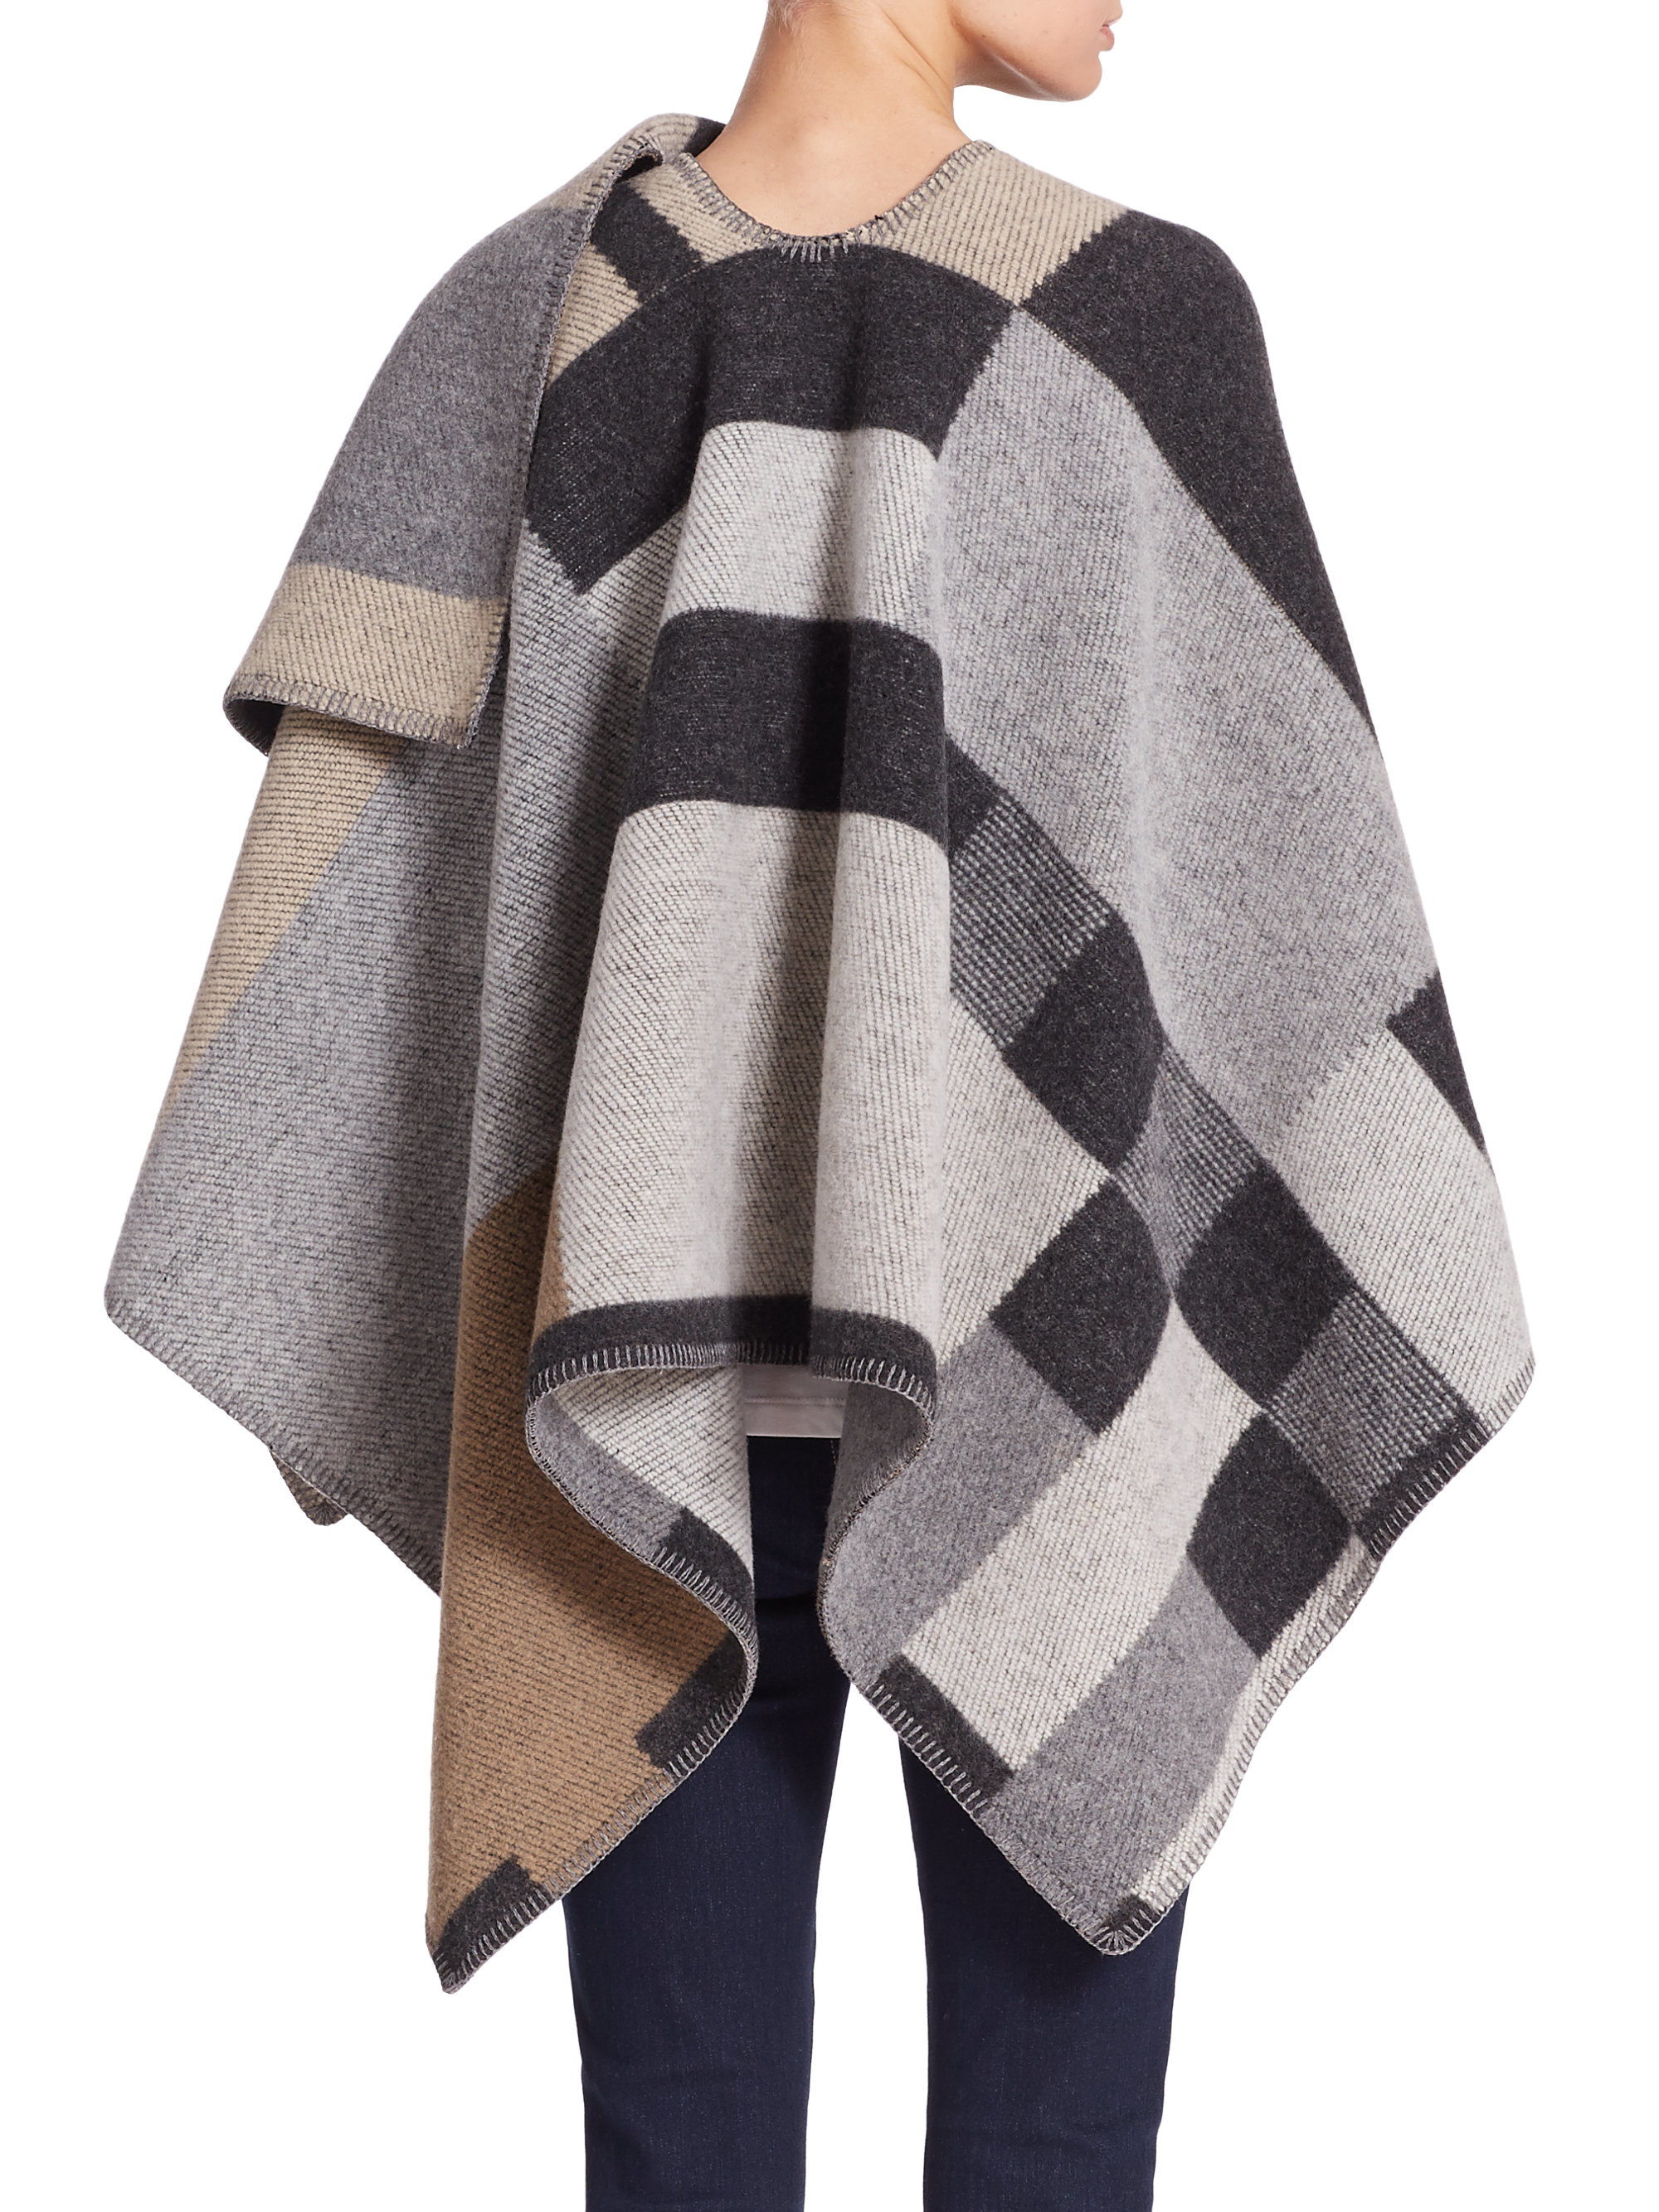 Lyst - Burberry Mega Check Wool & Cashmere Cape in Brown